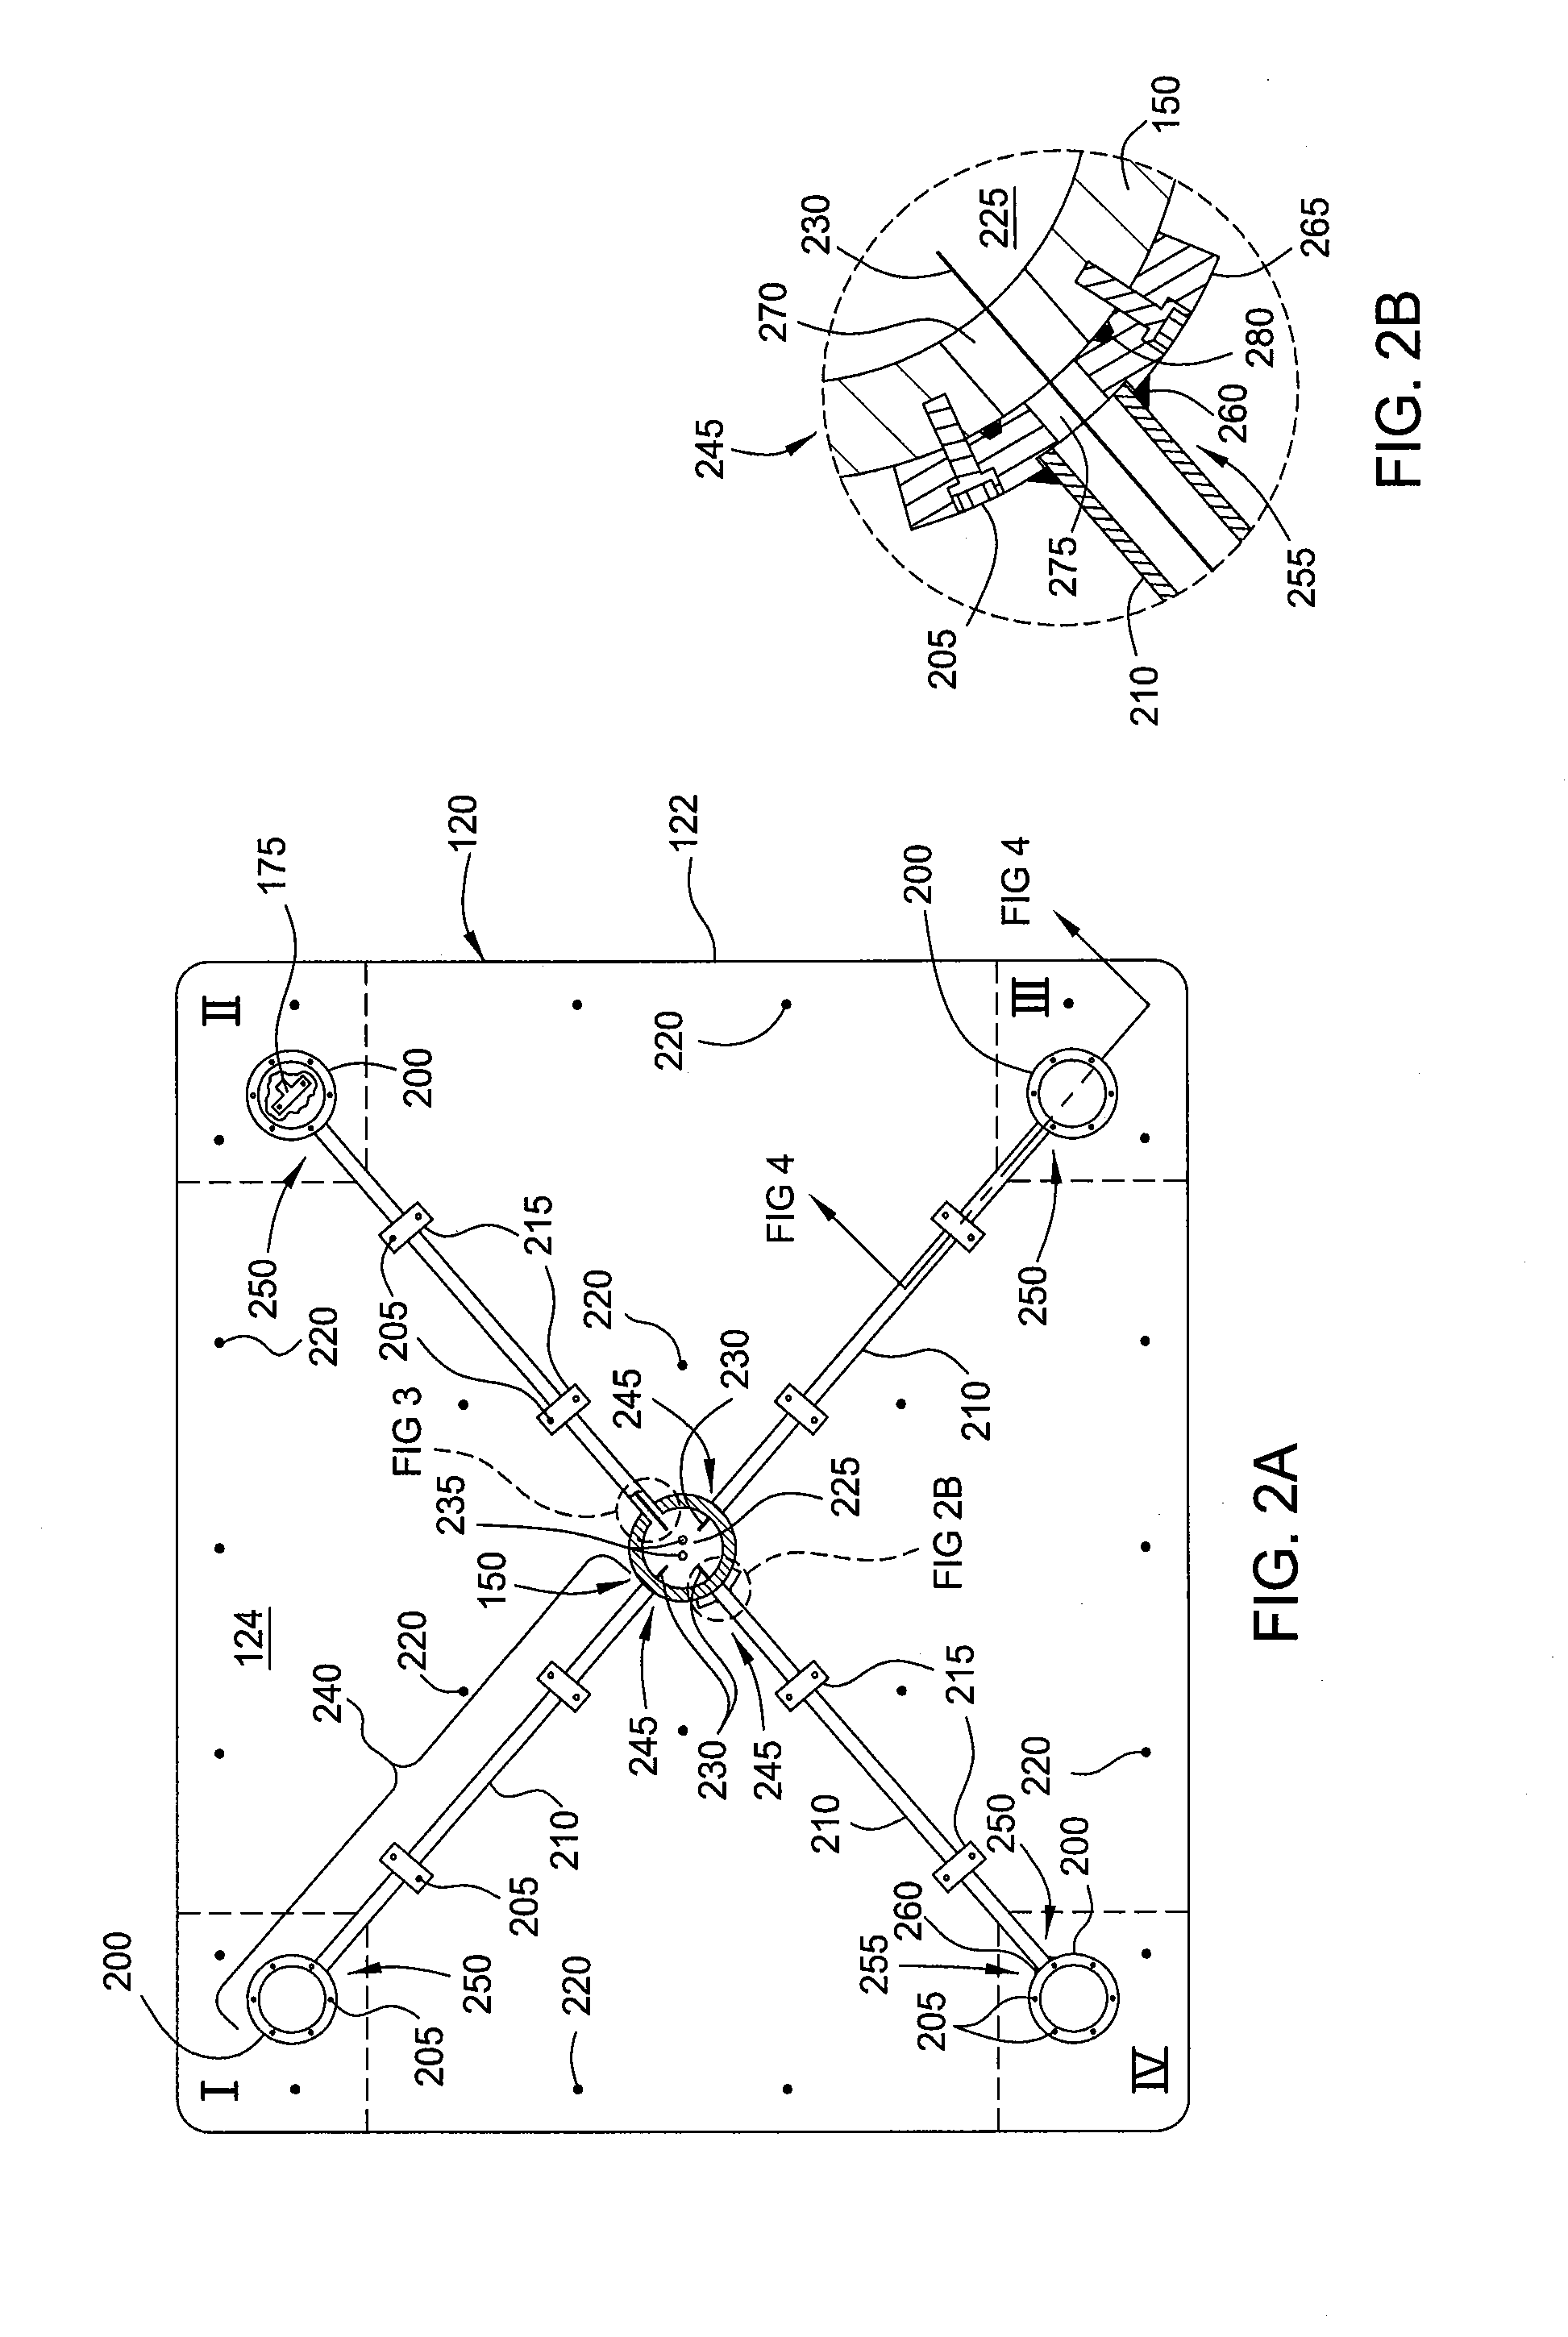 Method and apparatus for thermocouple installation or replacement in a substrate support